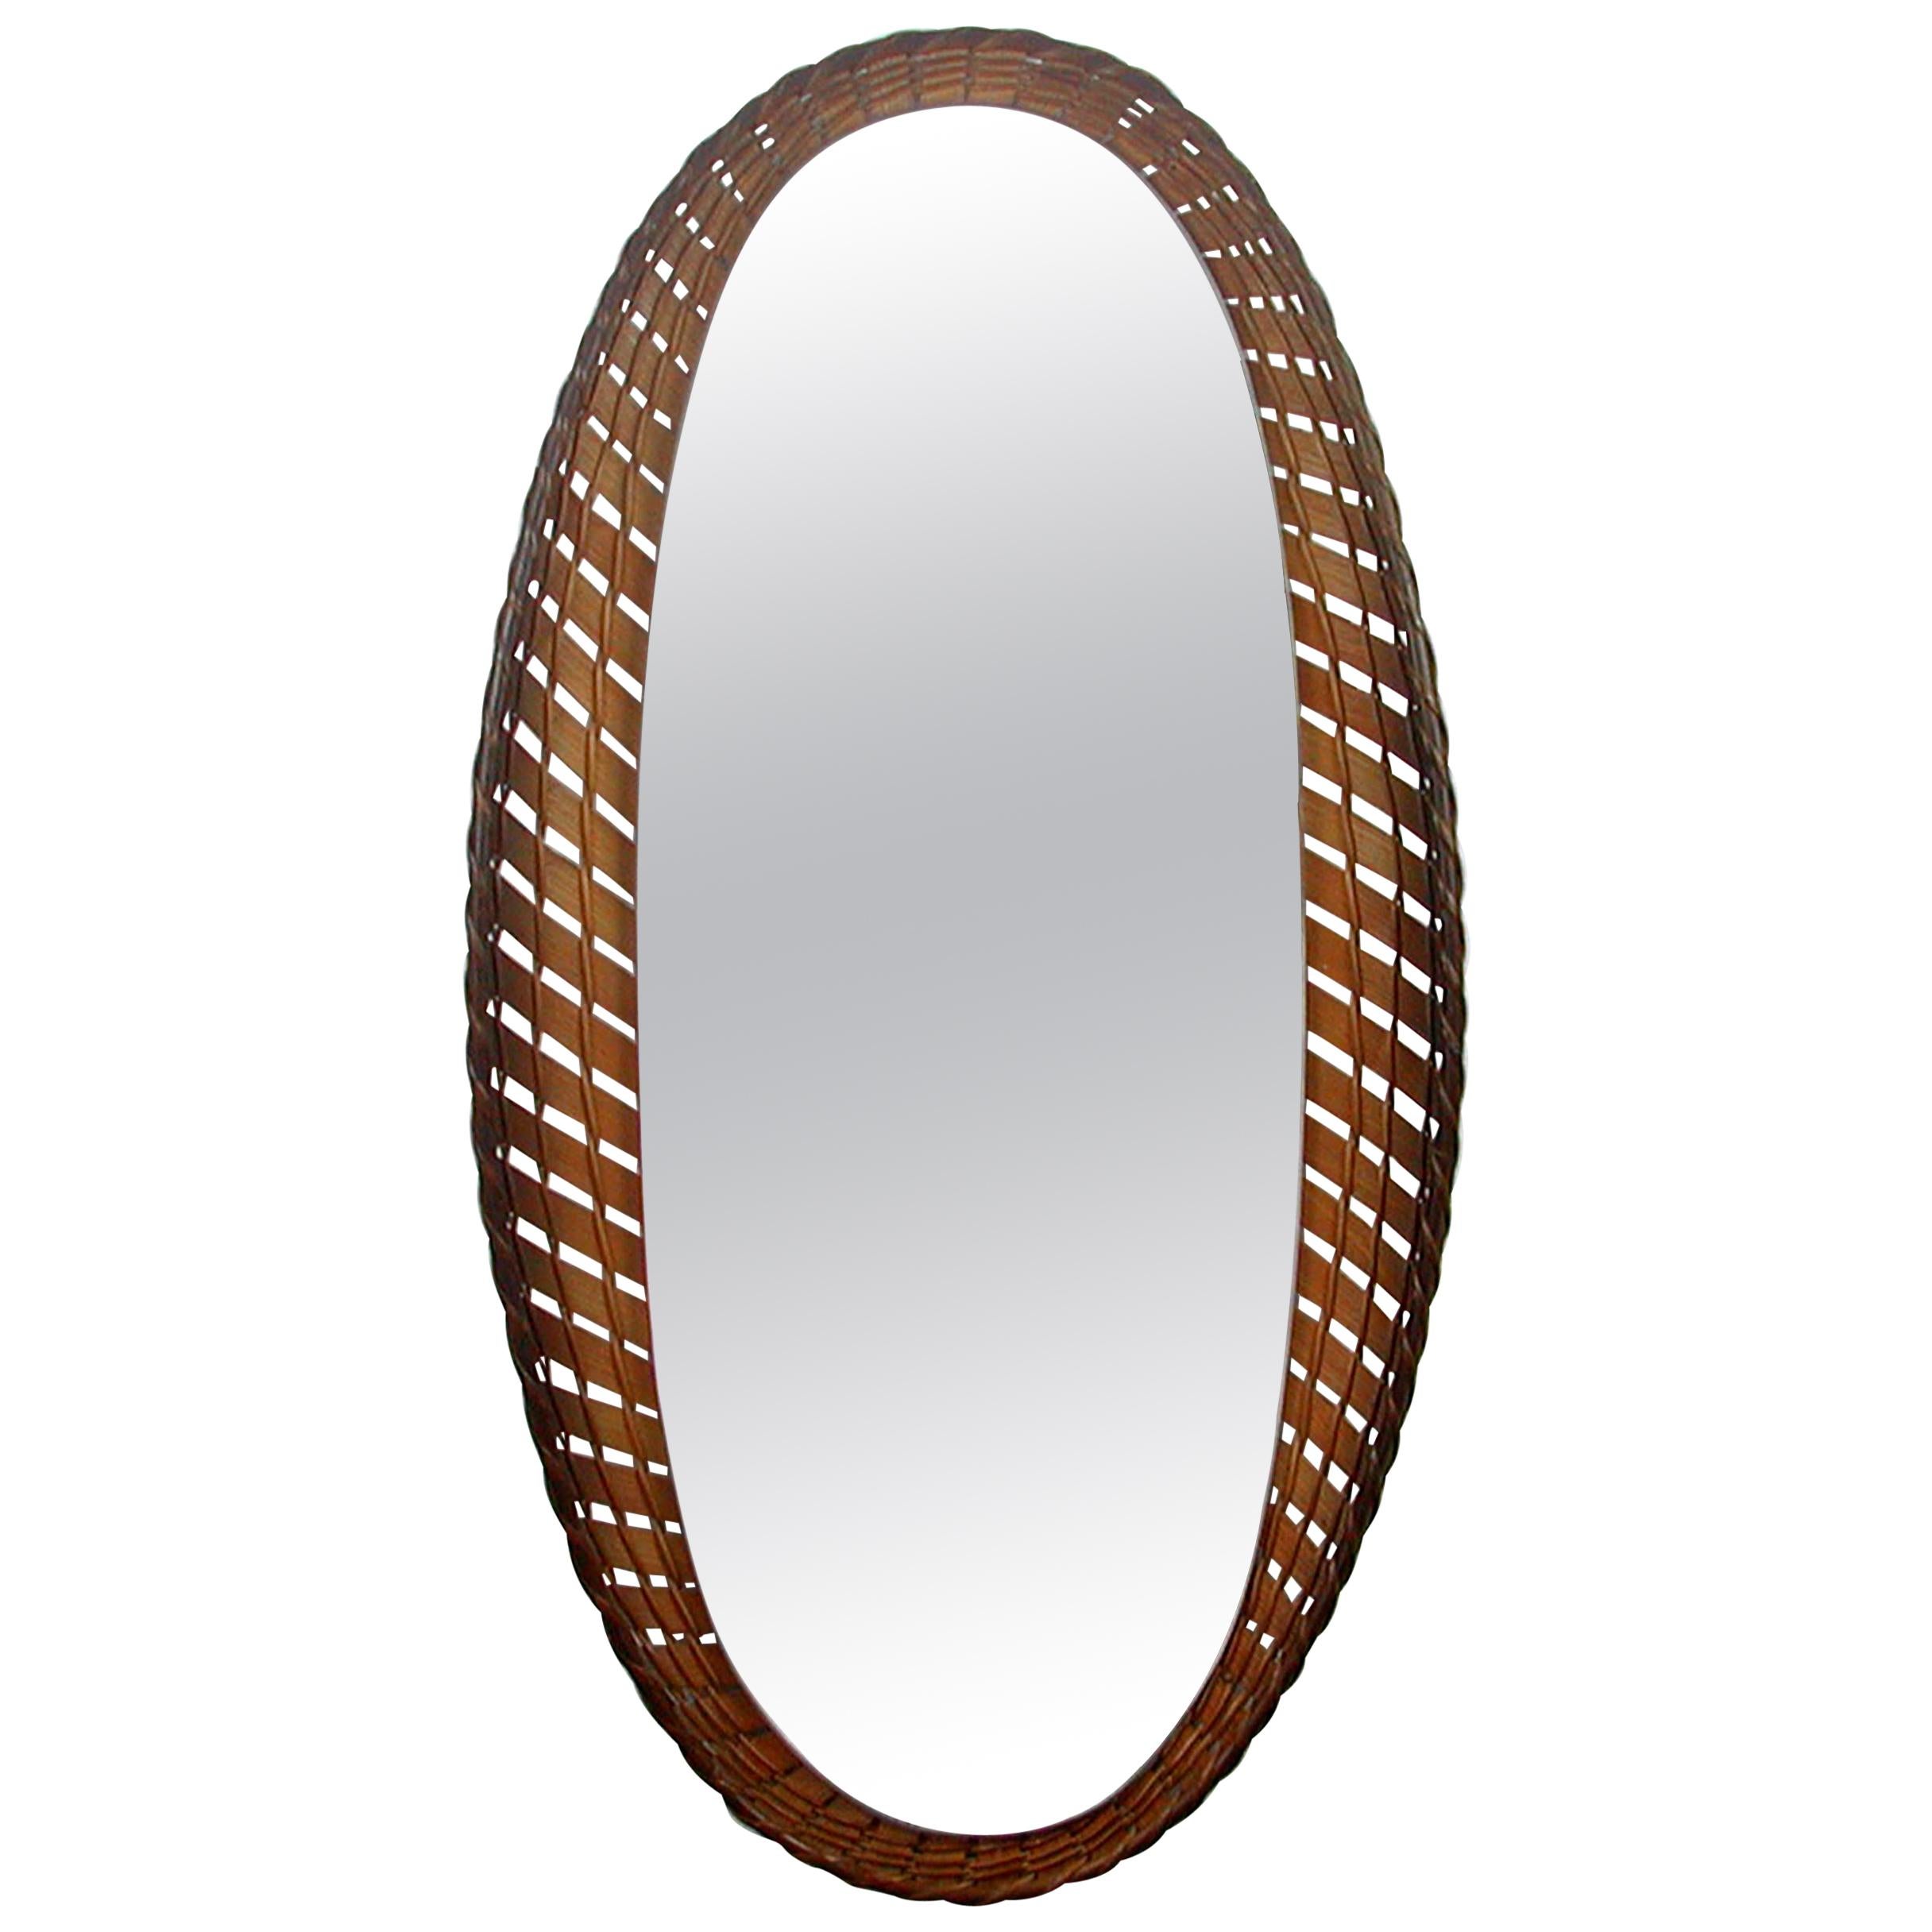 Large French Midcentury Oval Rattan and Wood Wall Mirror, 1950s